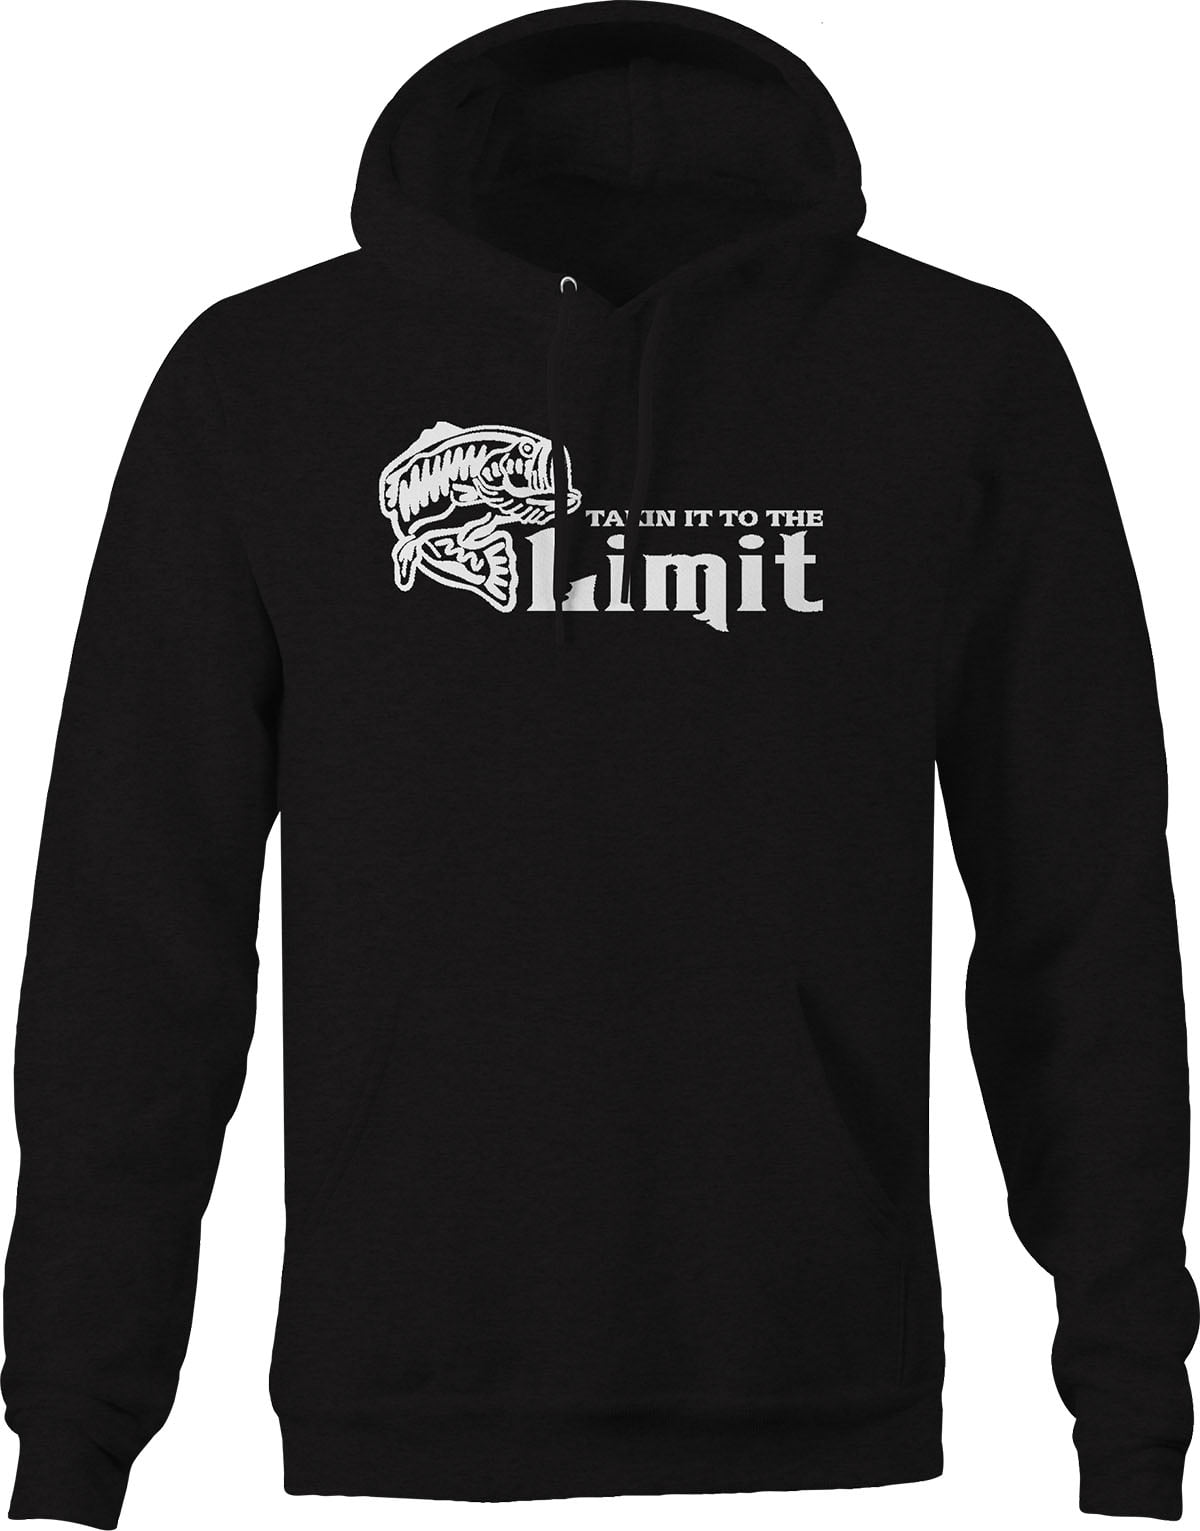 Takin it to the Limit Bass Fishing Hoodies for Men Large Black